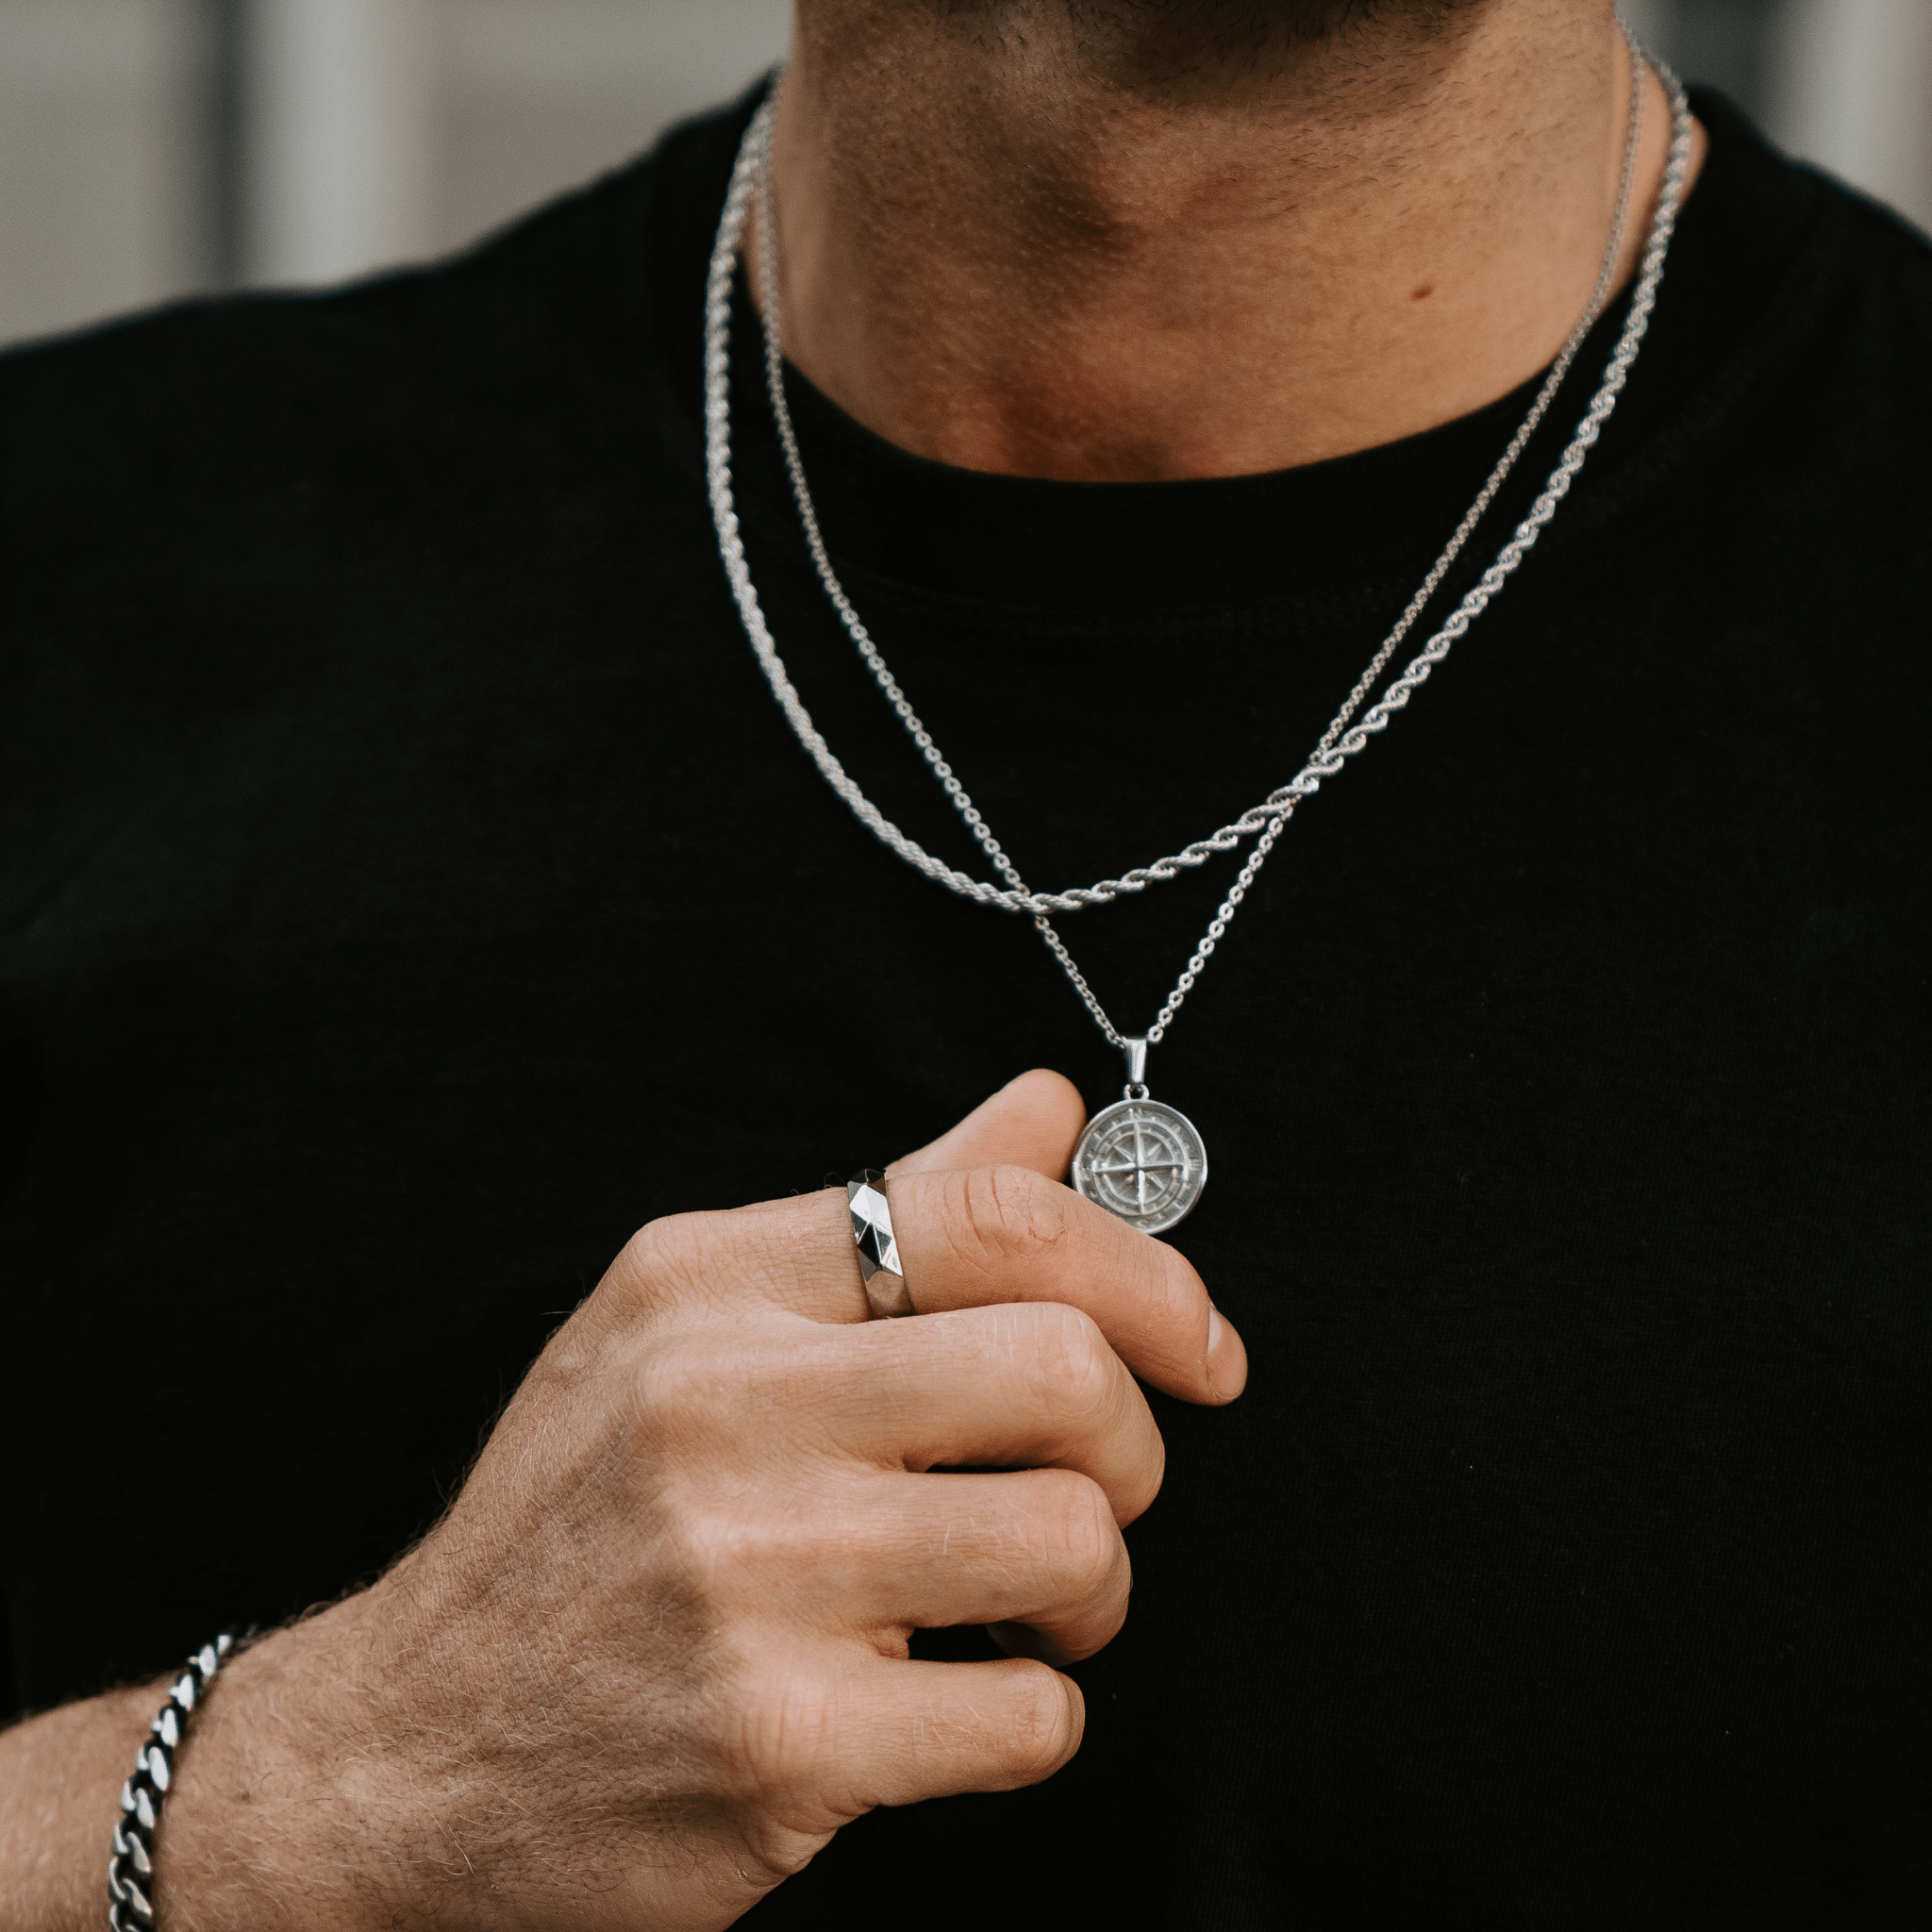 Stainless Steel Compass Pendant and Chain for Men